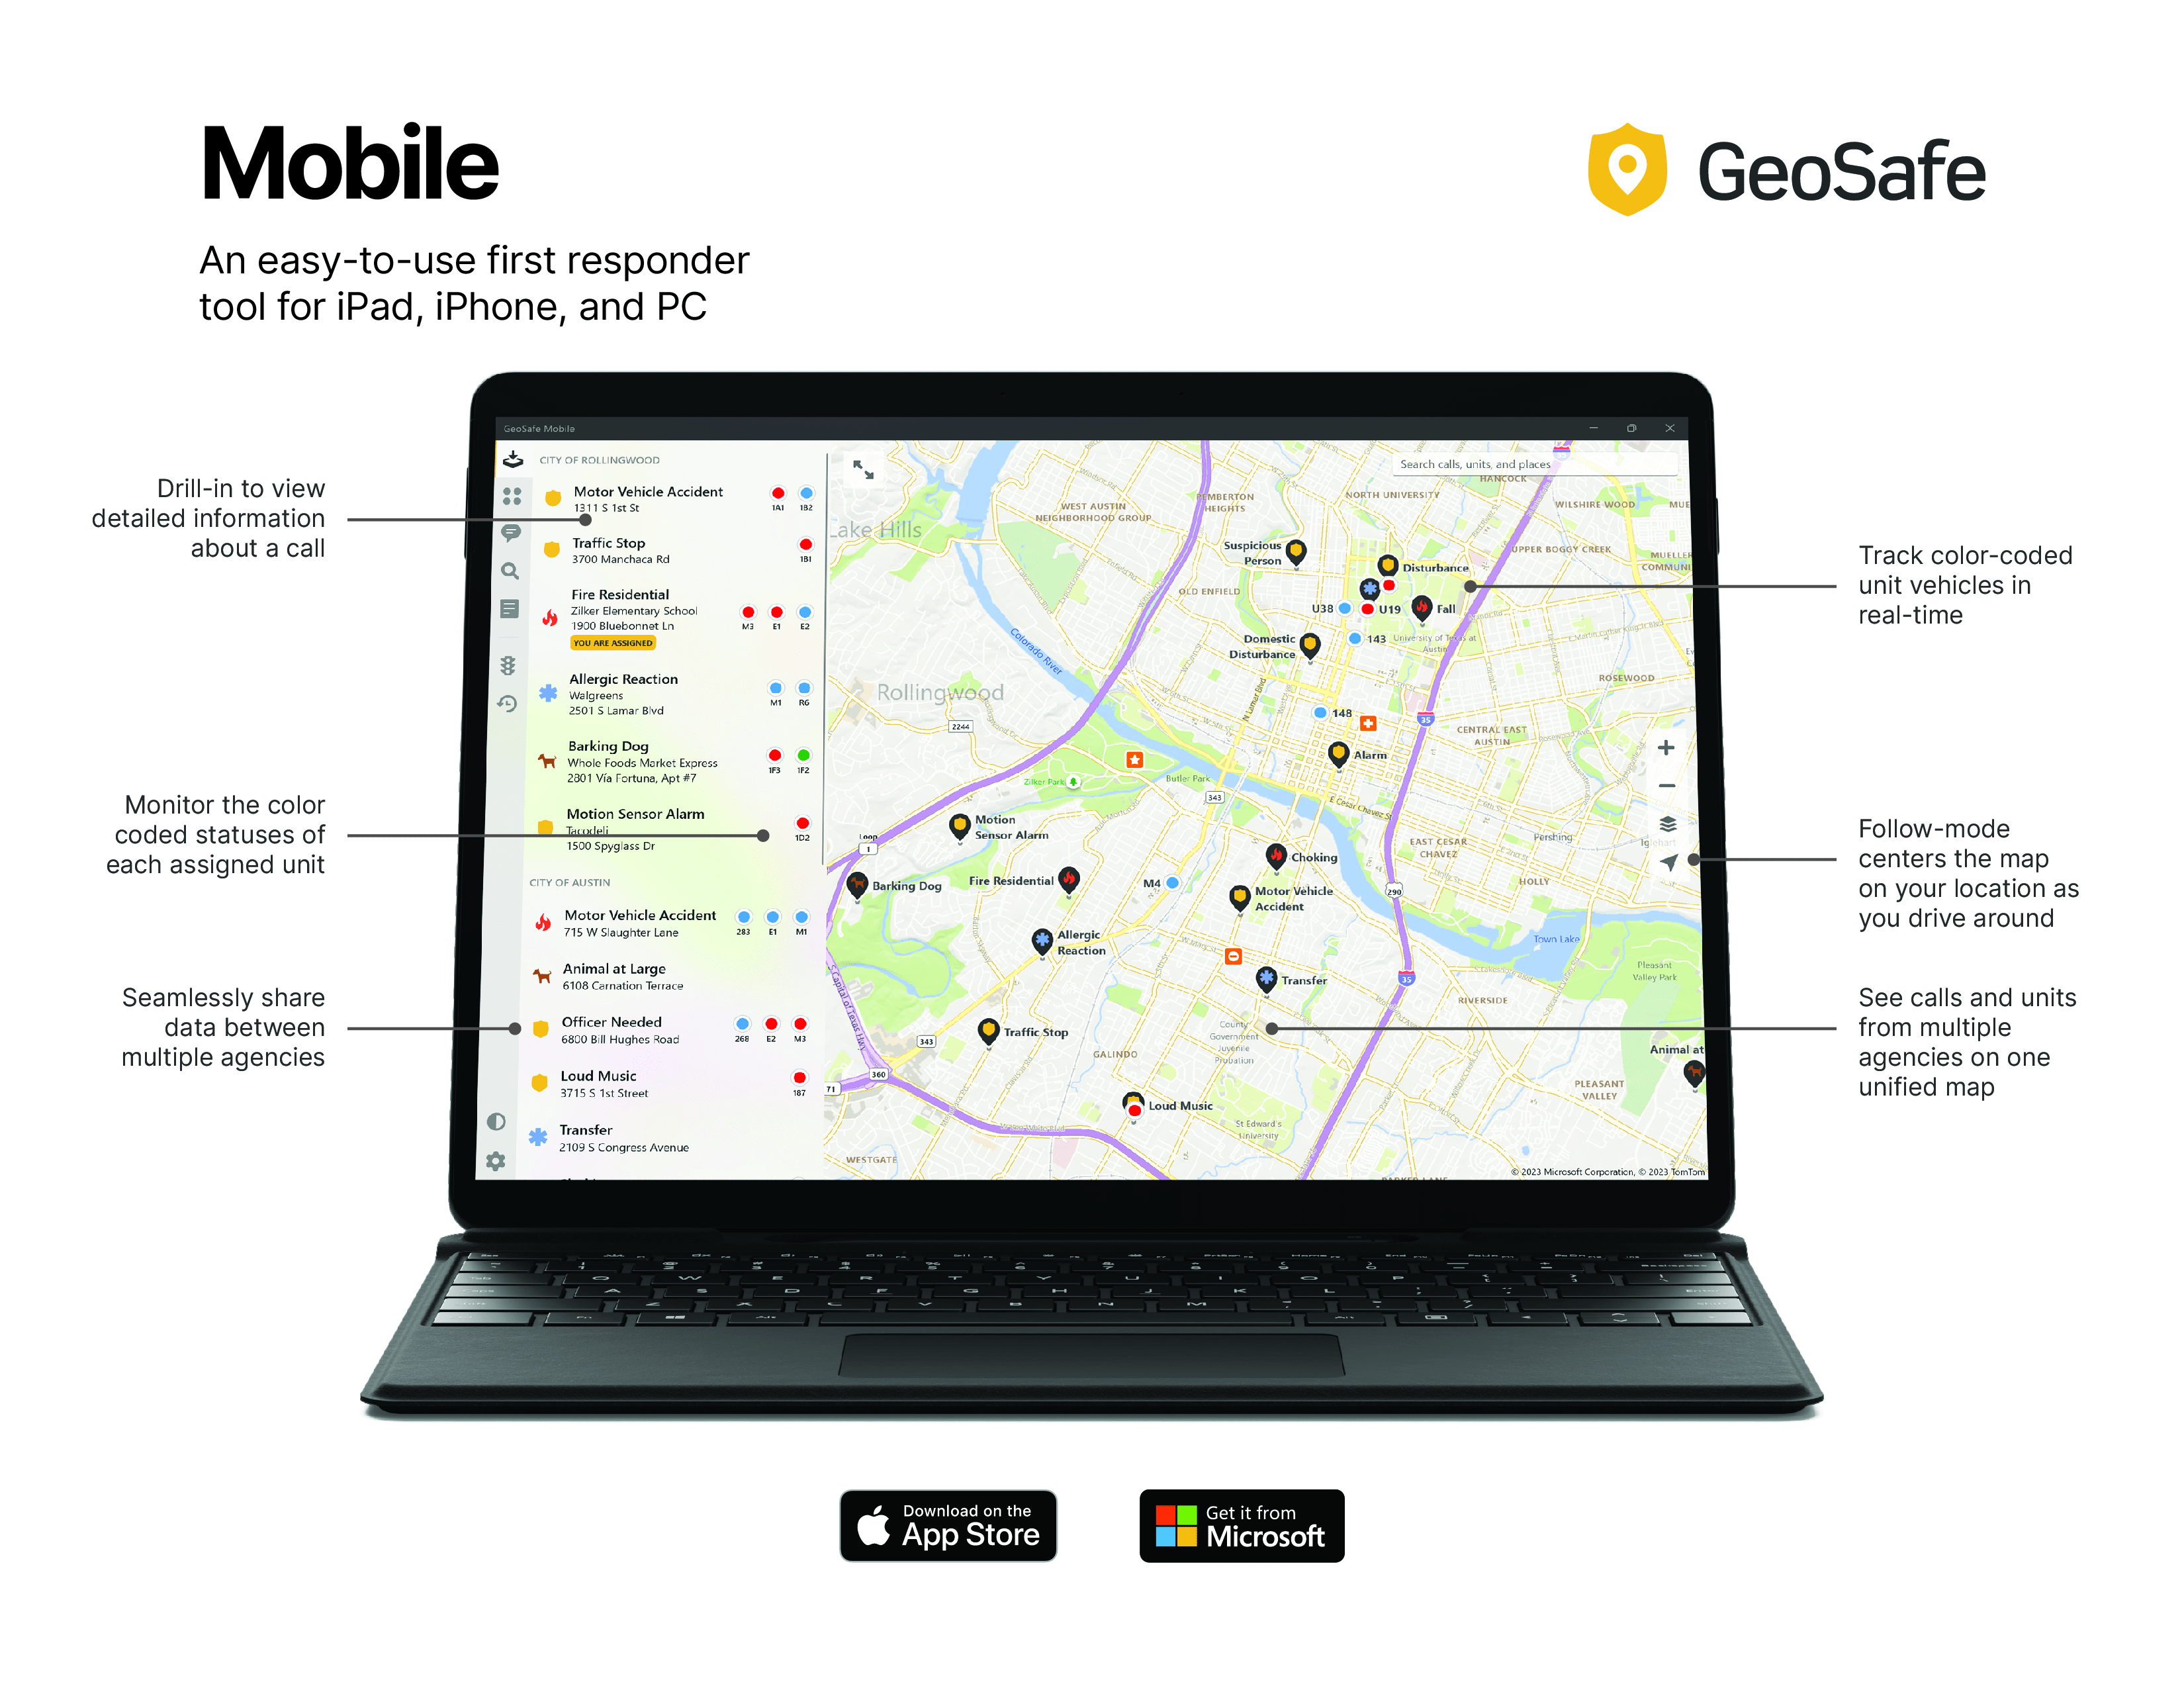 GeoSafe tracking the responders